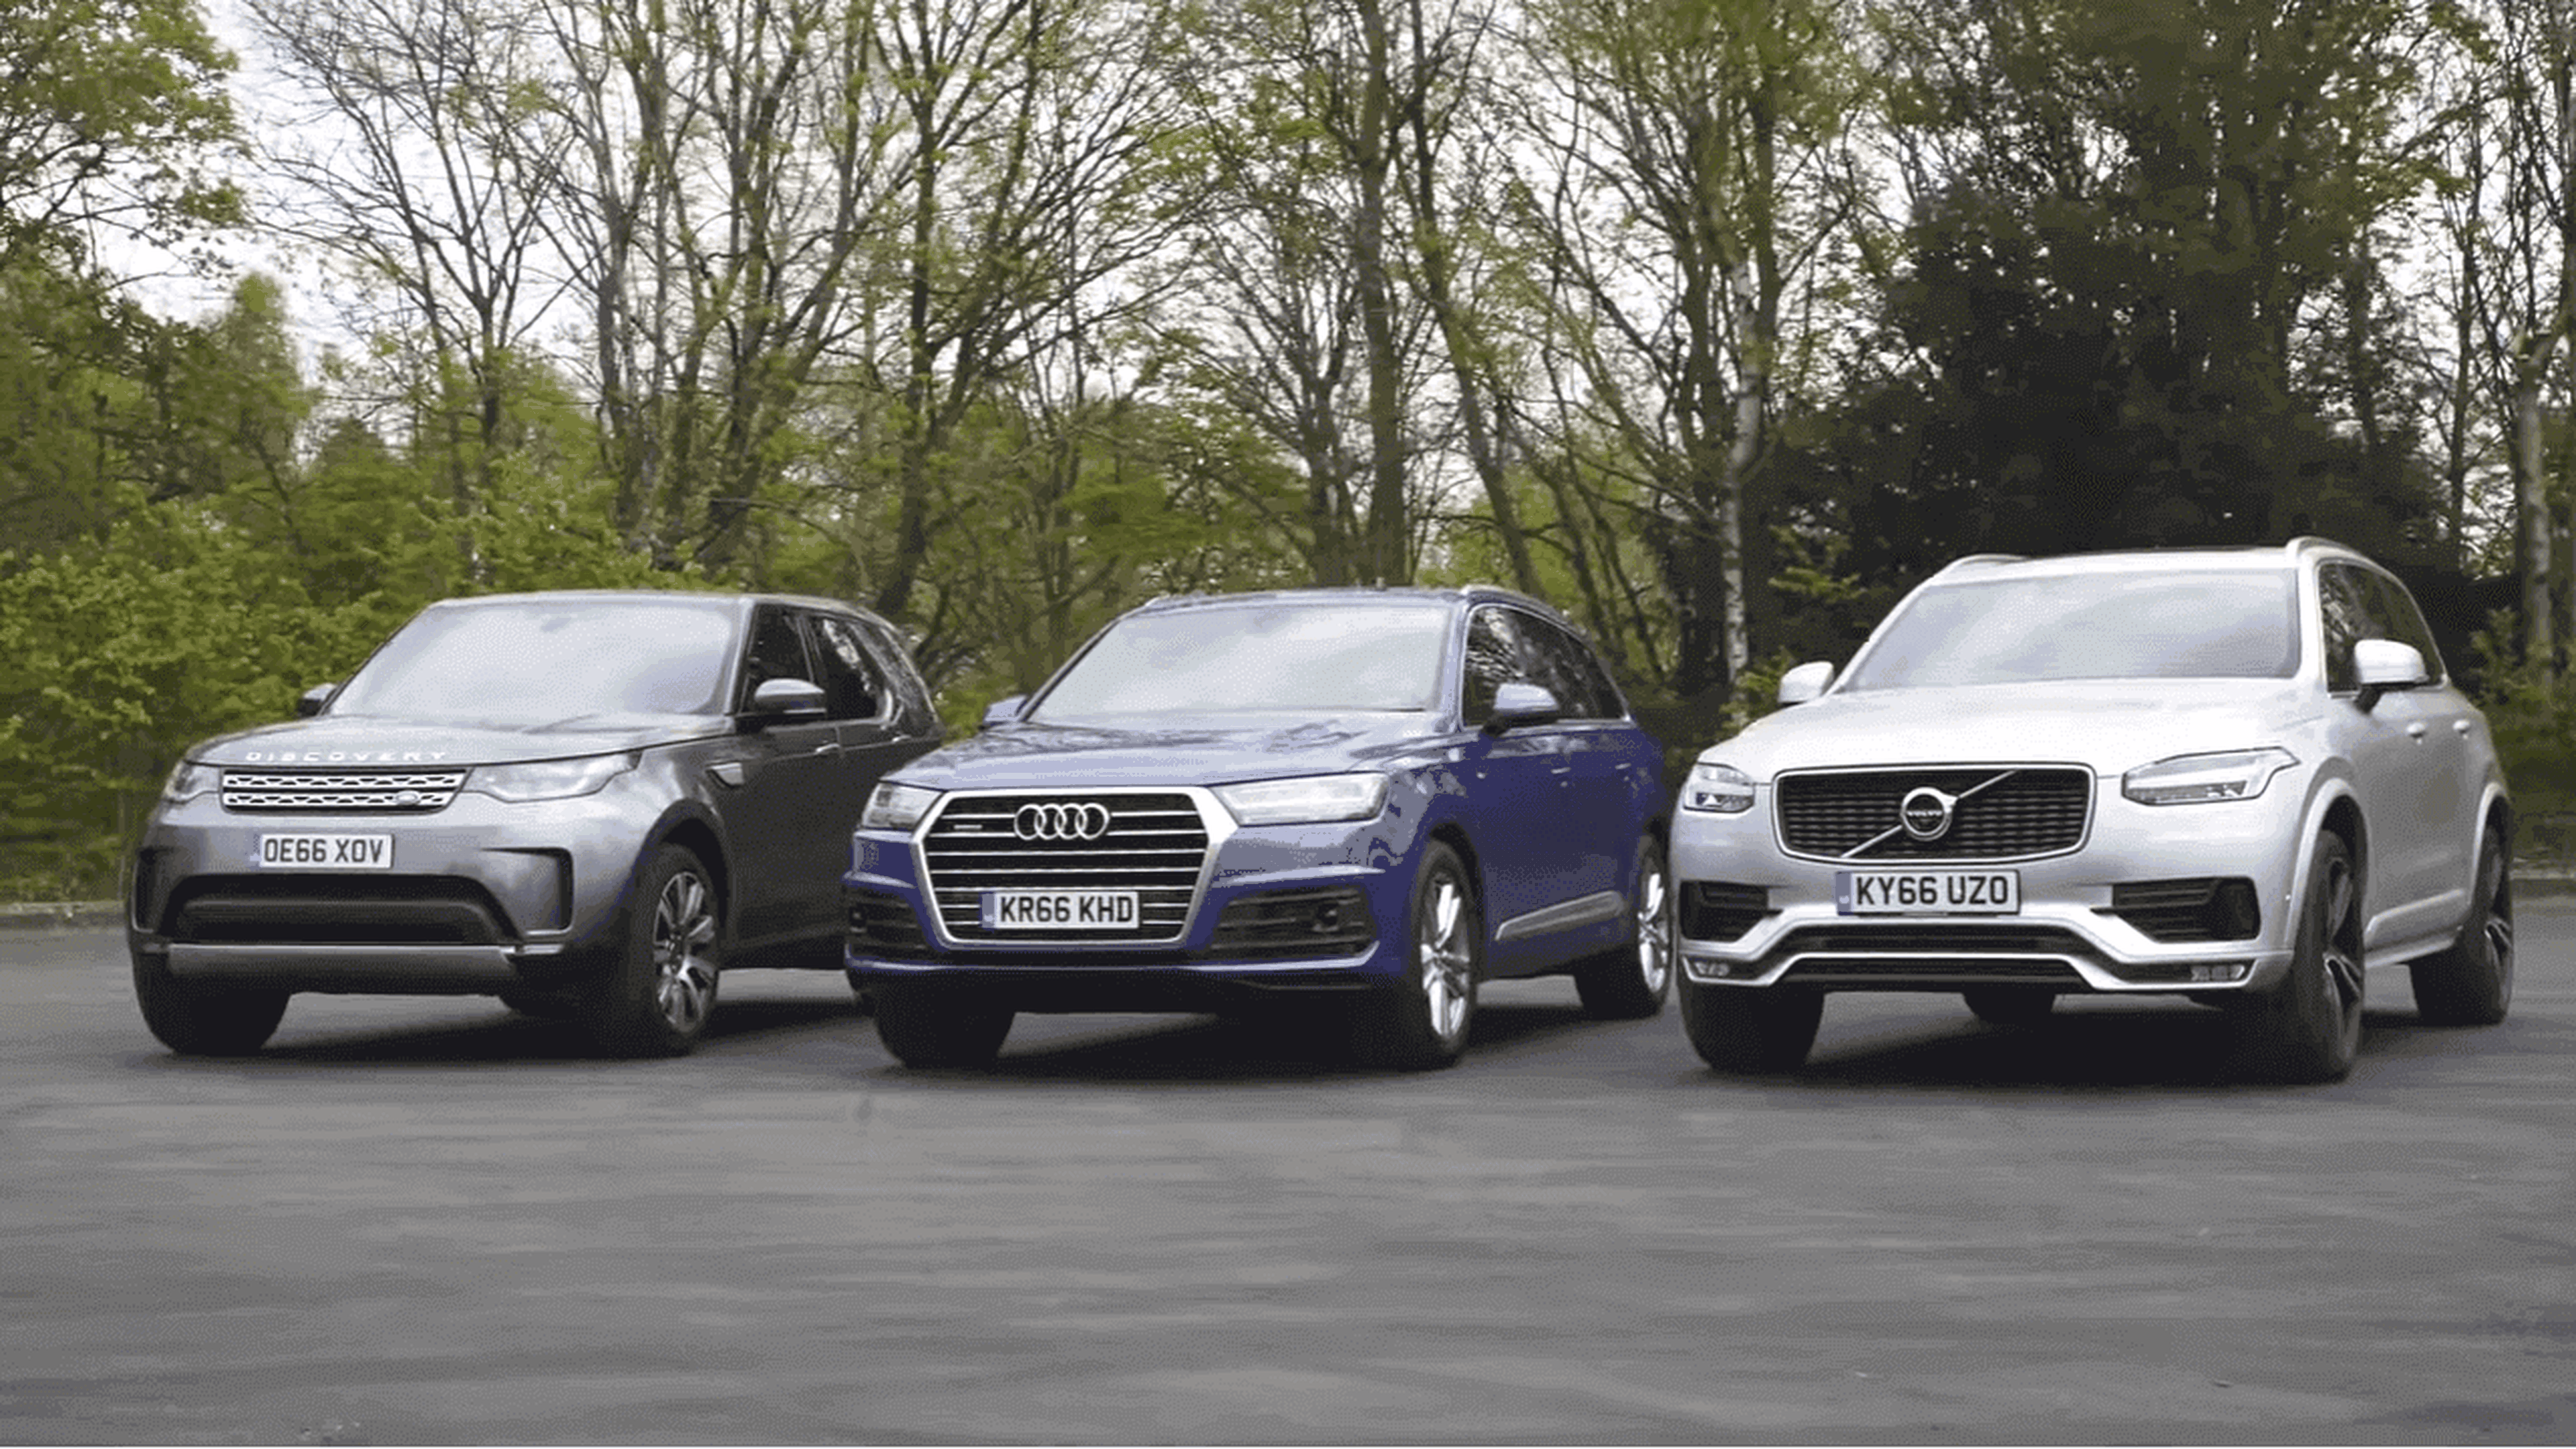 Volvo XC90 Audi Q7 Land Rover Discovery